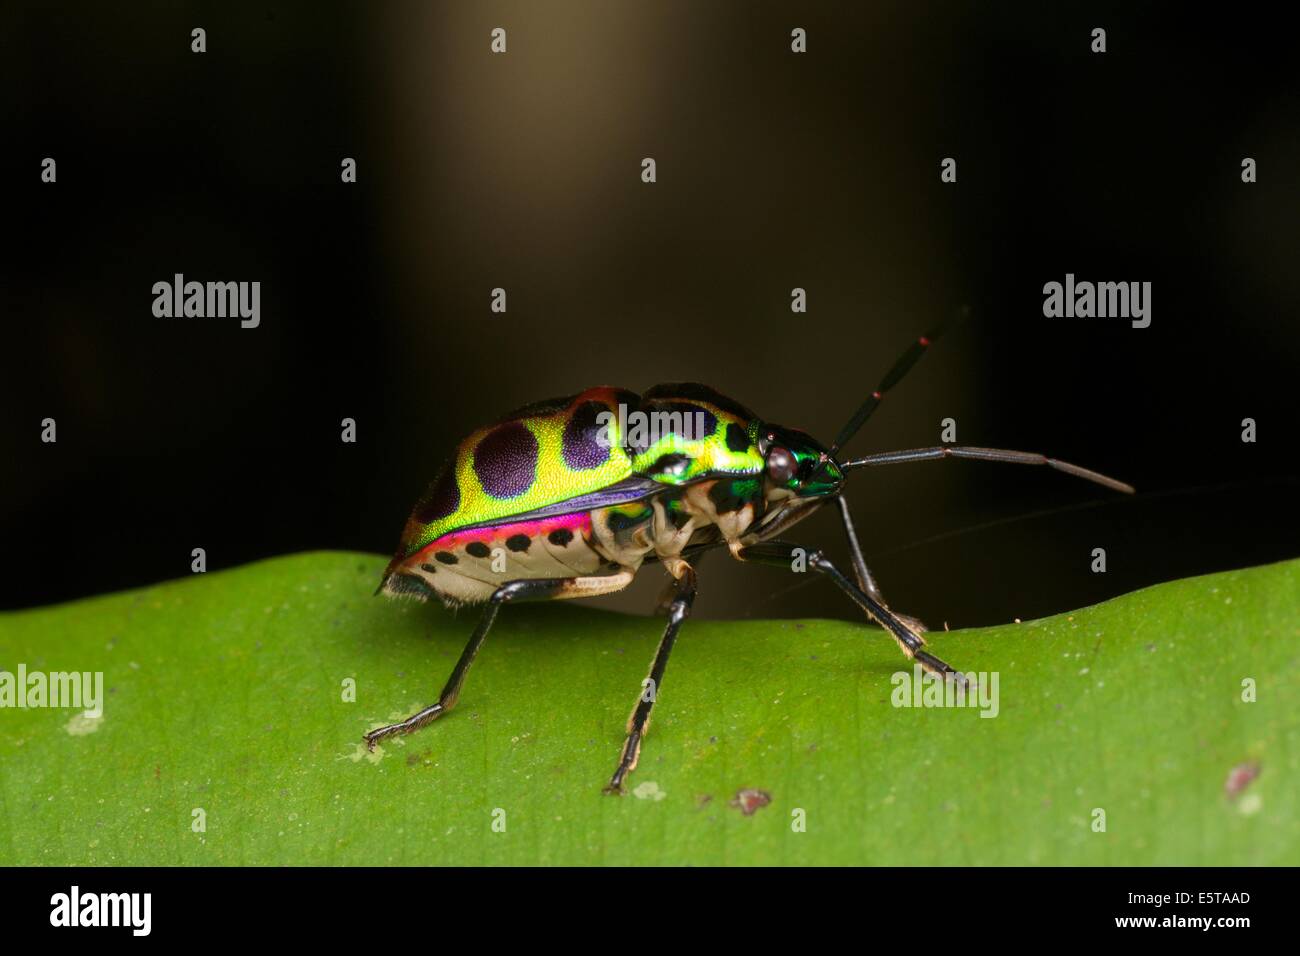 Chrysocoris stolli of the family Scutelleridae. They are commonly known as jewel bugs or metallic shield bugs due to their often Stock Photo